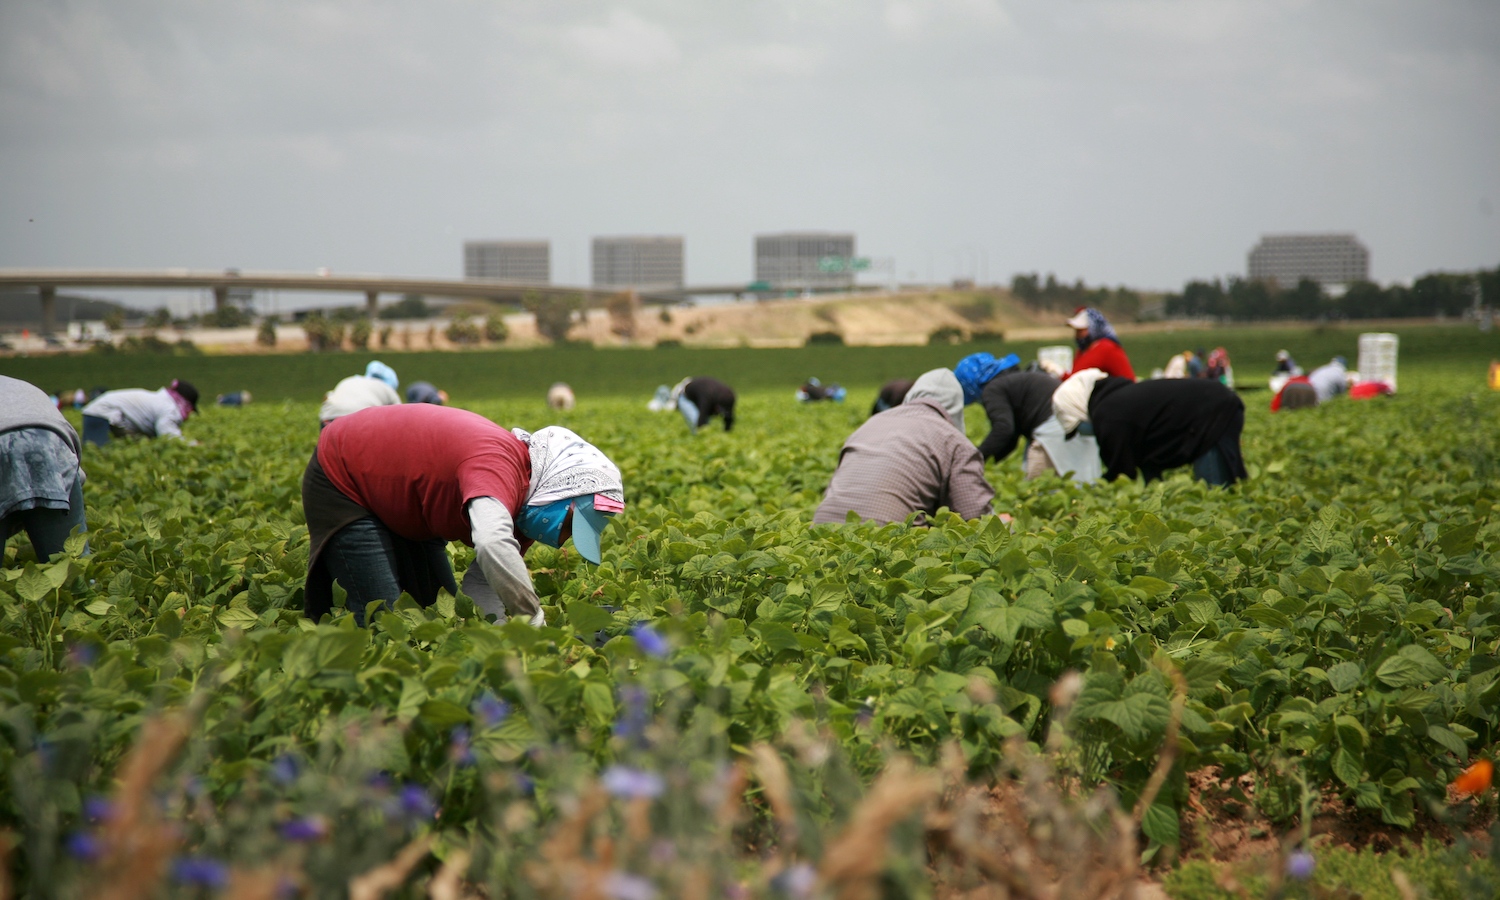 Border closures have farm industry concerned for loss of seasonal workers